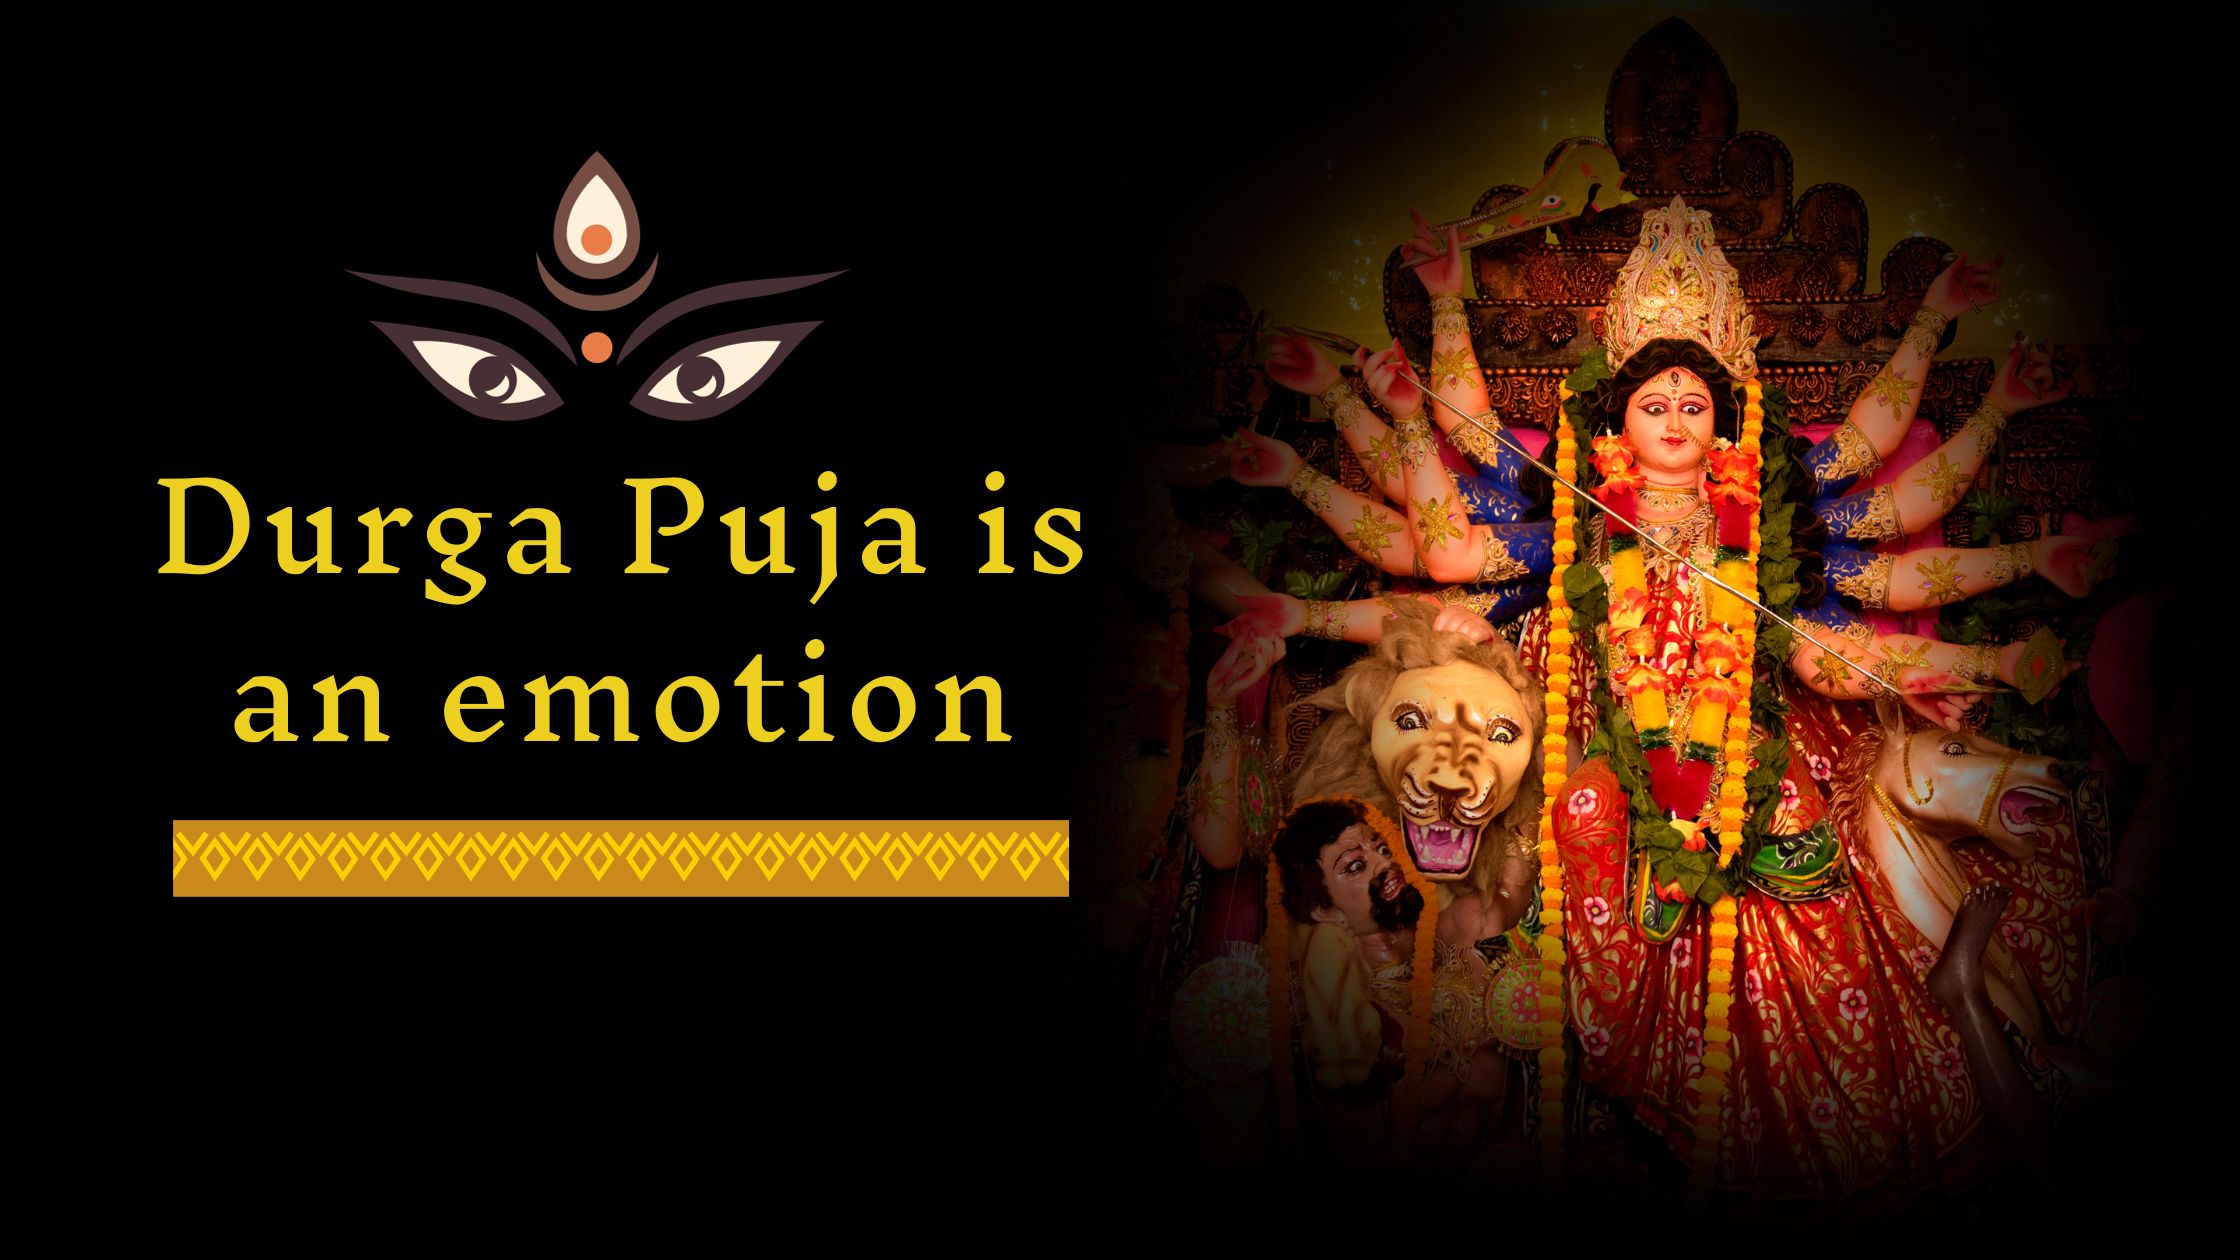 Durga Puja is an emotion